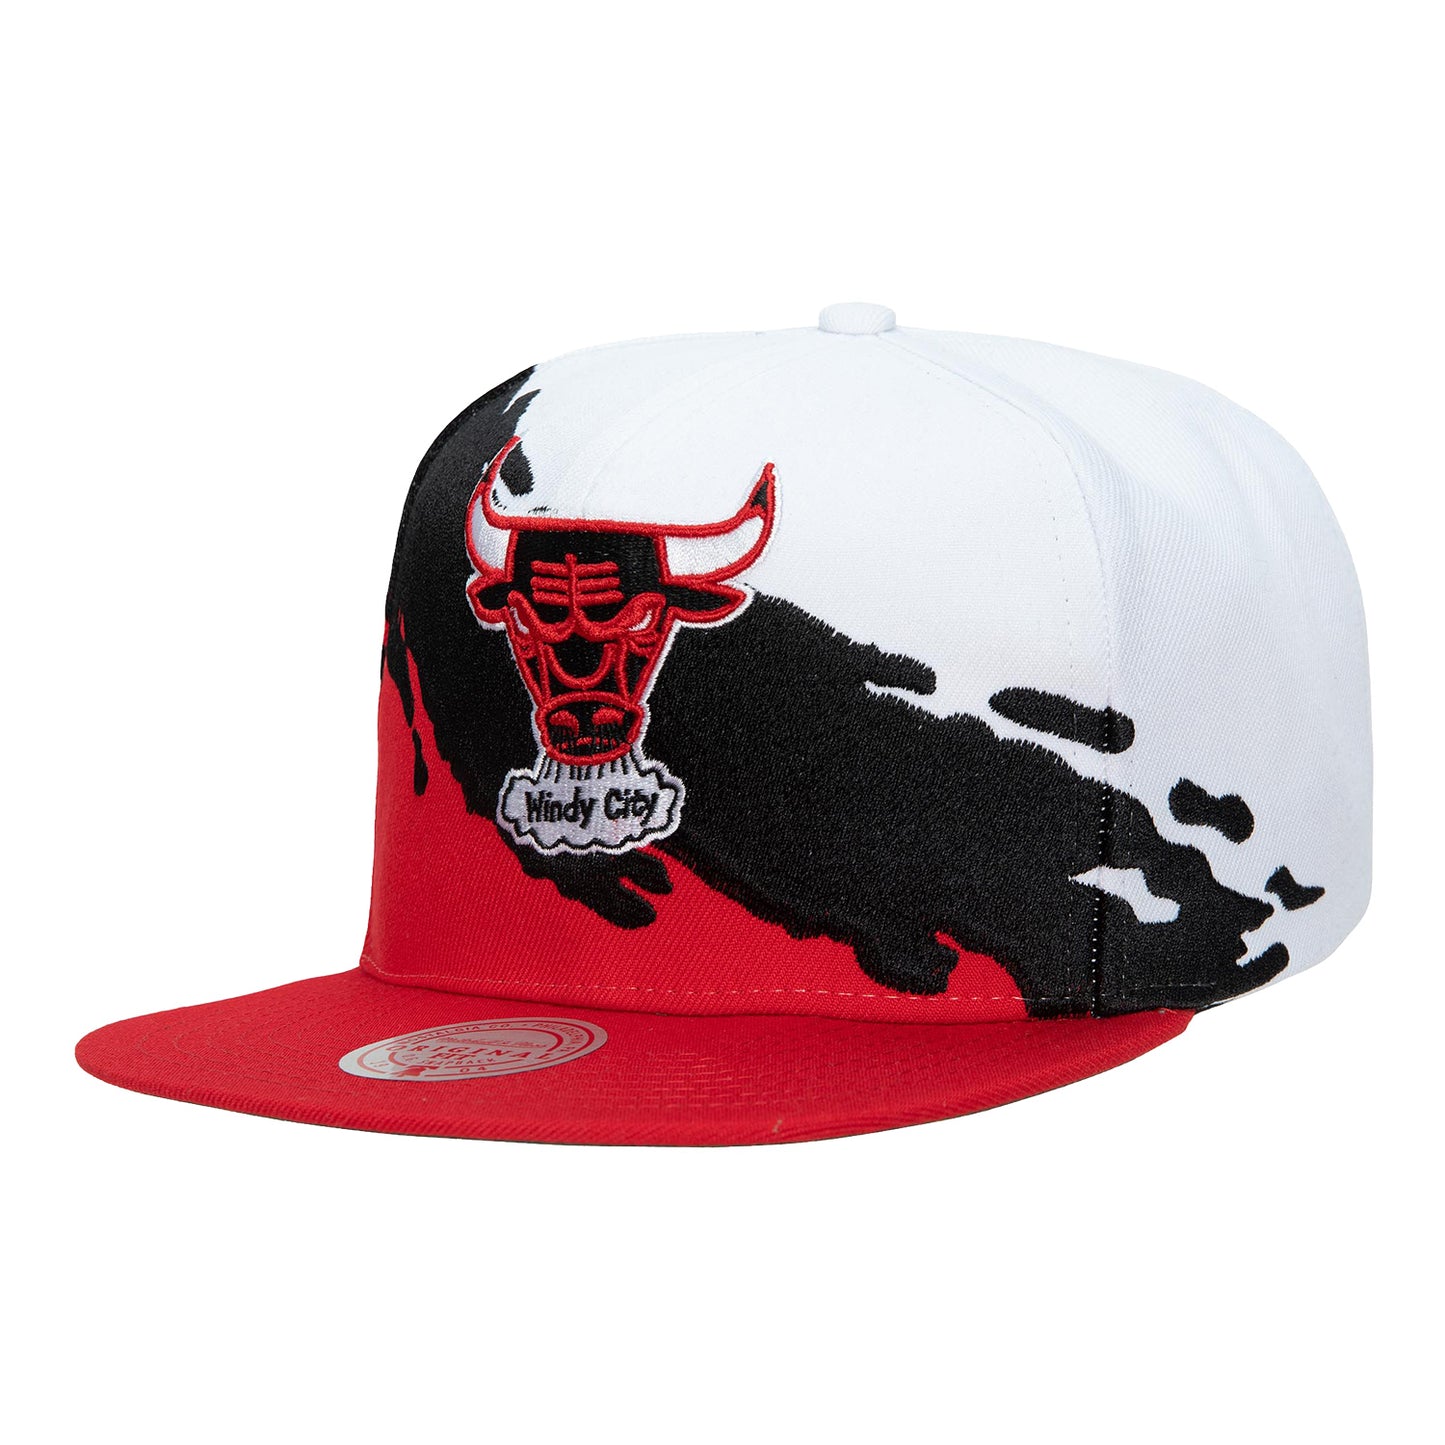 Chicago Bulls M&N '98 Champs Snapback - front view